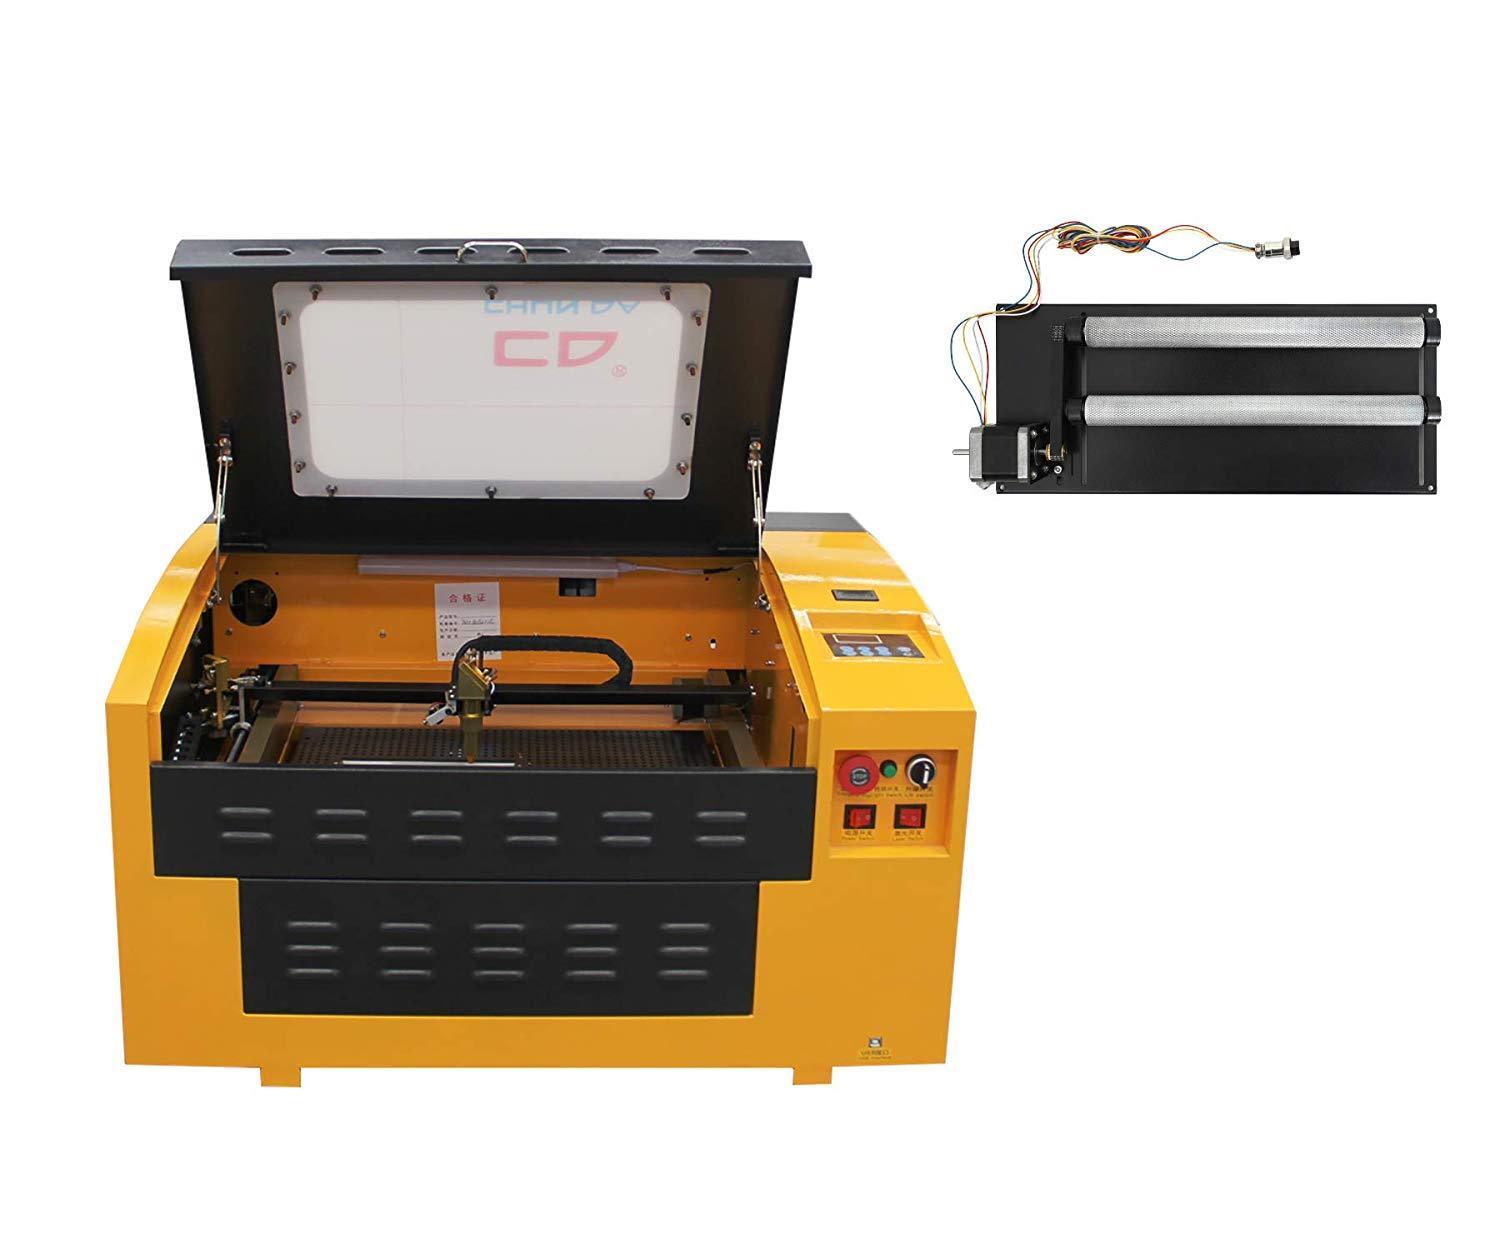 TEN-HIGH 430 40W Version Laser Engraver Cutter with USB Port-- rotary Axis